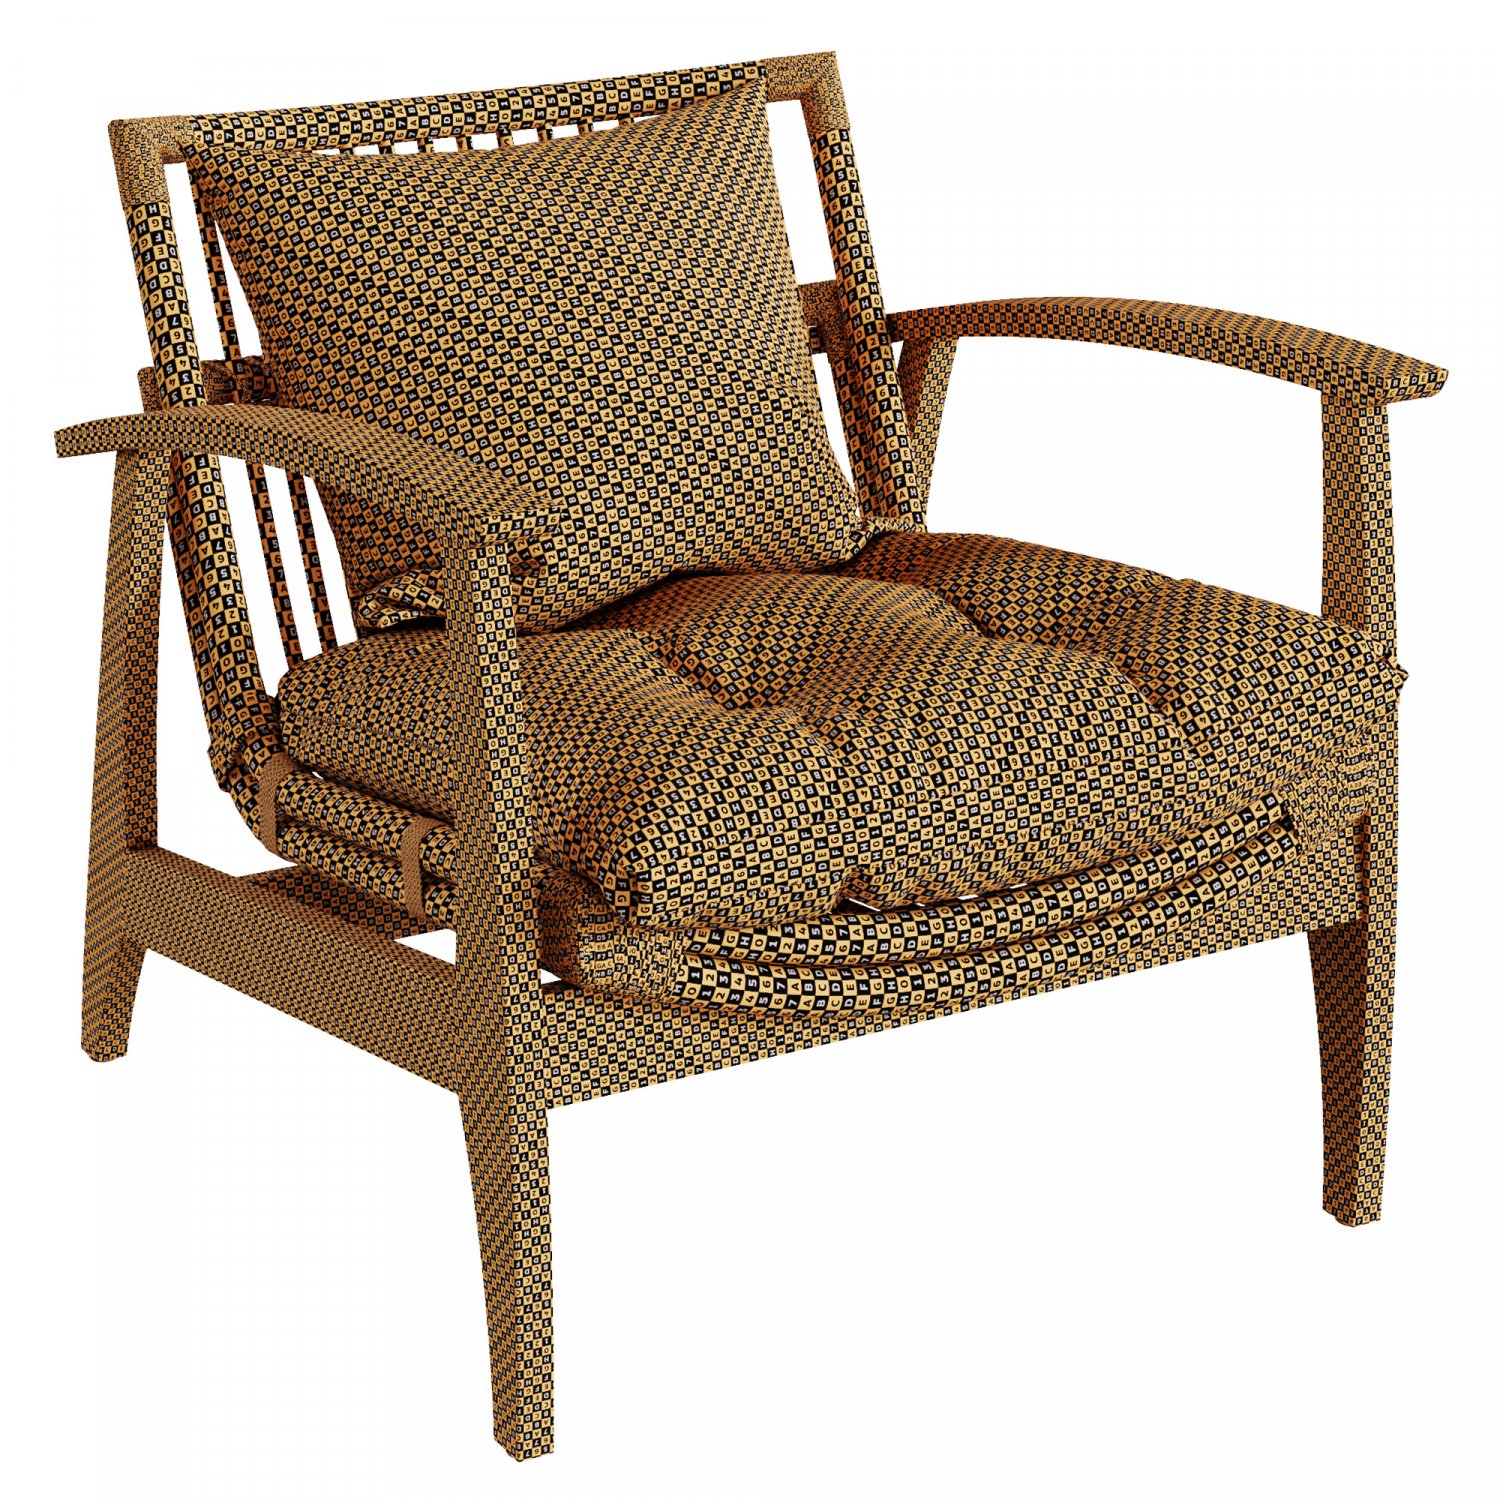 Noelie Rattan Lounge Chair with Black Cushion + Reviews